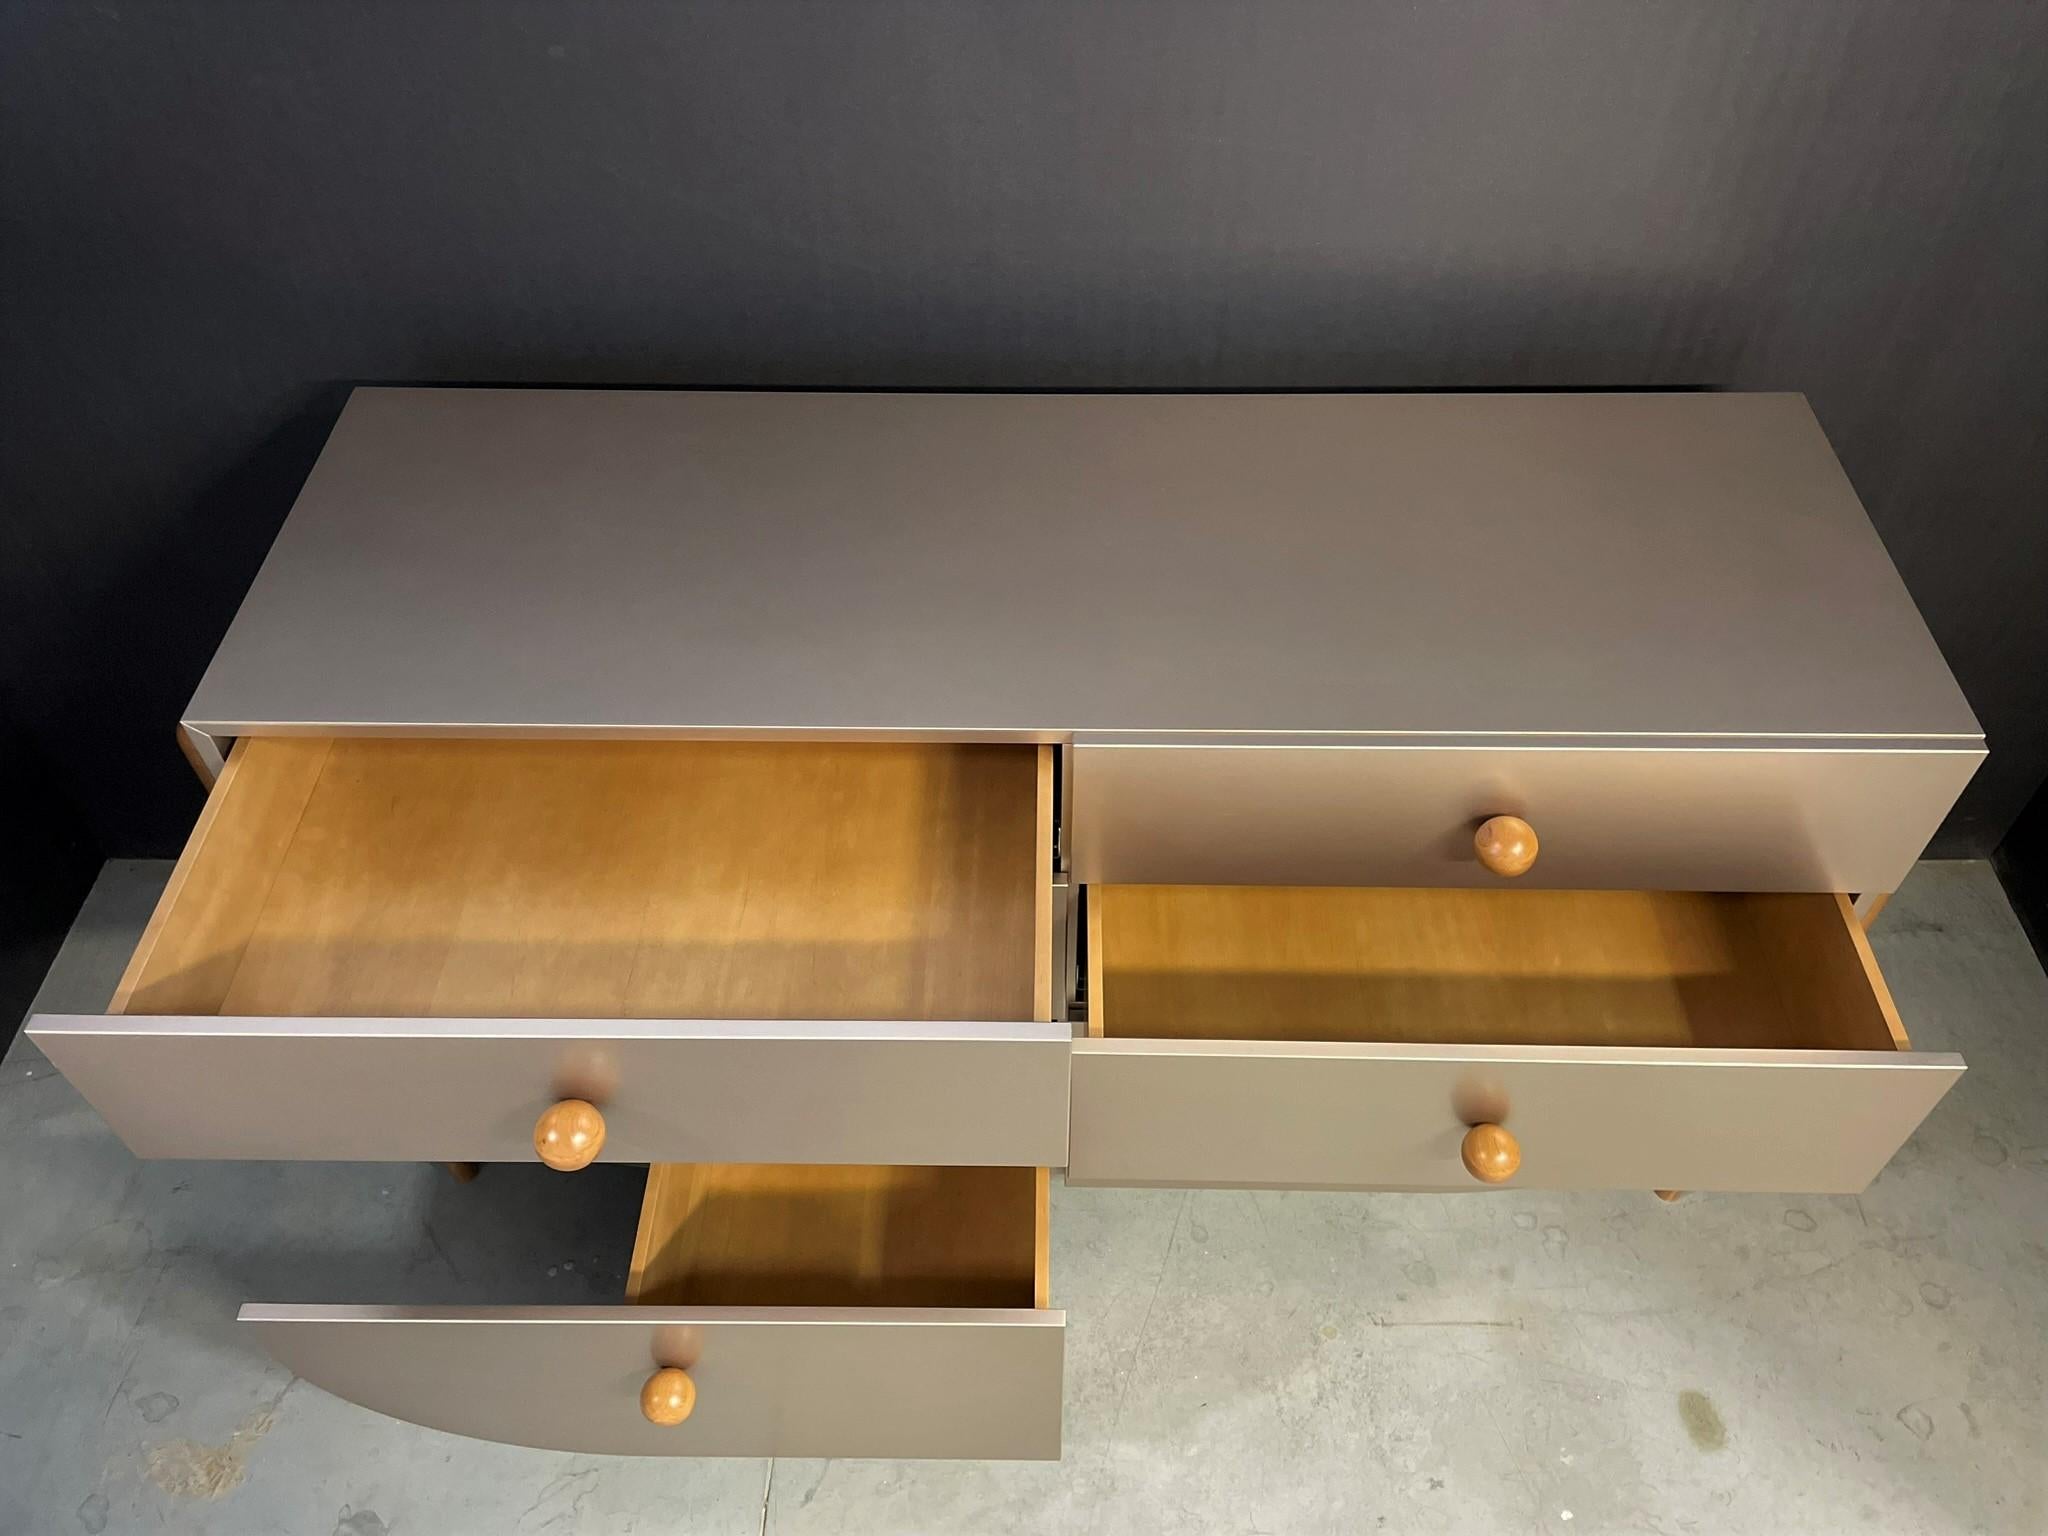 Metallic painted sideboard gives shinning effect and enriches the room interior. 
Solid wooded legs are the accent of completeness and make this furniture unique. Comparable 6 drawers give space to store small items or clothes and furniture could